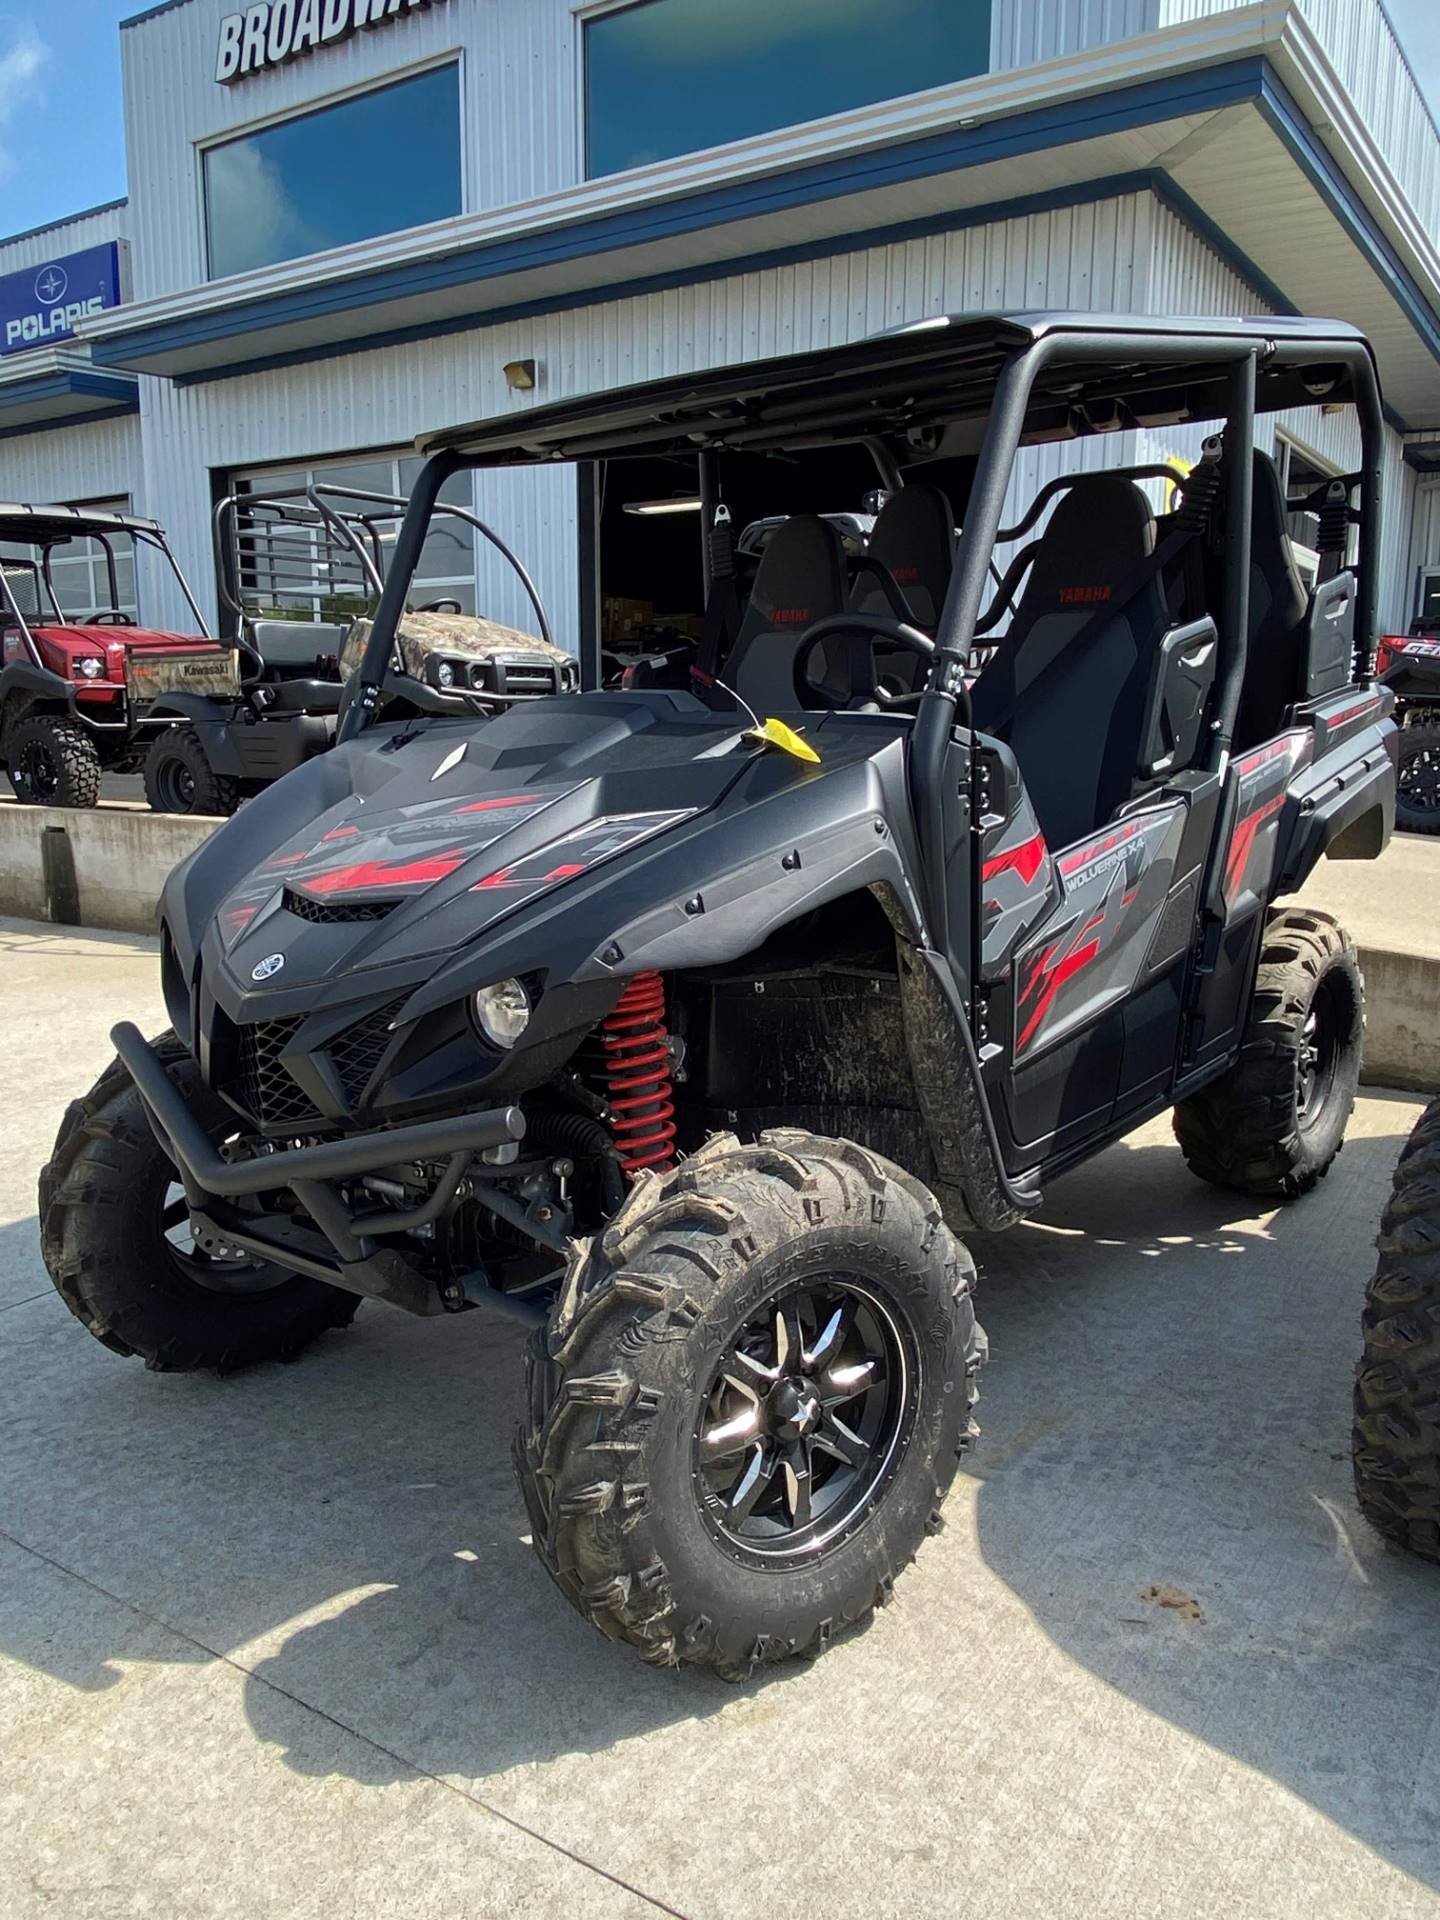 New 19 Yamaha Wolverine X4 Se Utility Vehicles In Tyler Tx Stock Number Broadway Powersports Located In Tyler Tx Broadwaypowersports Com